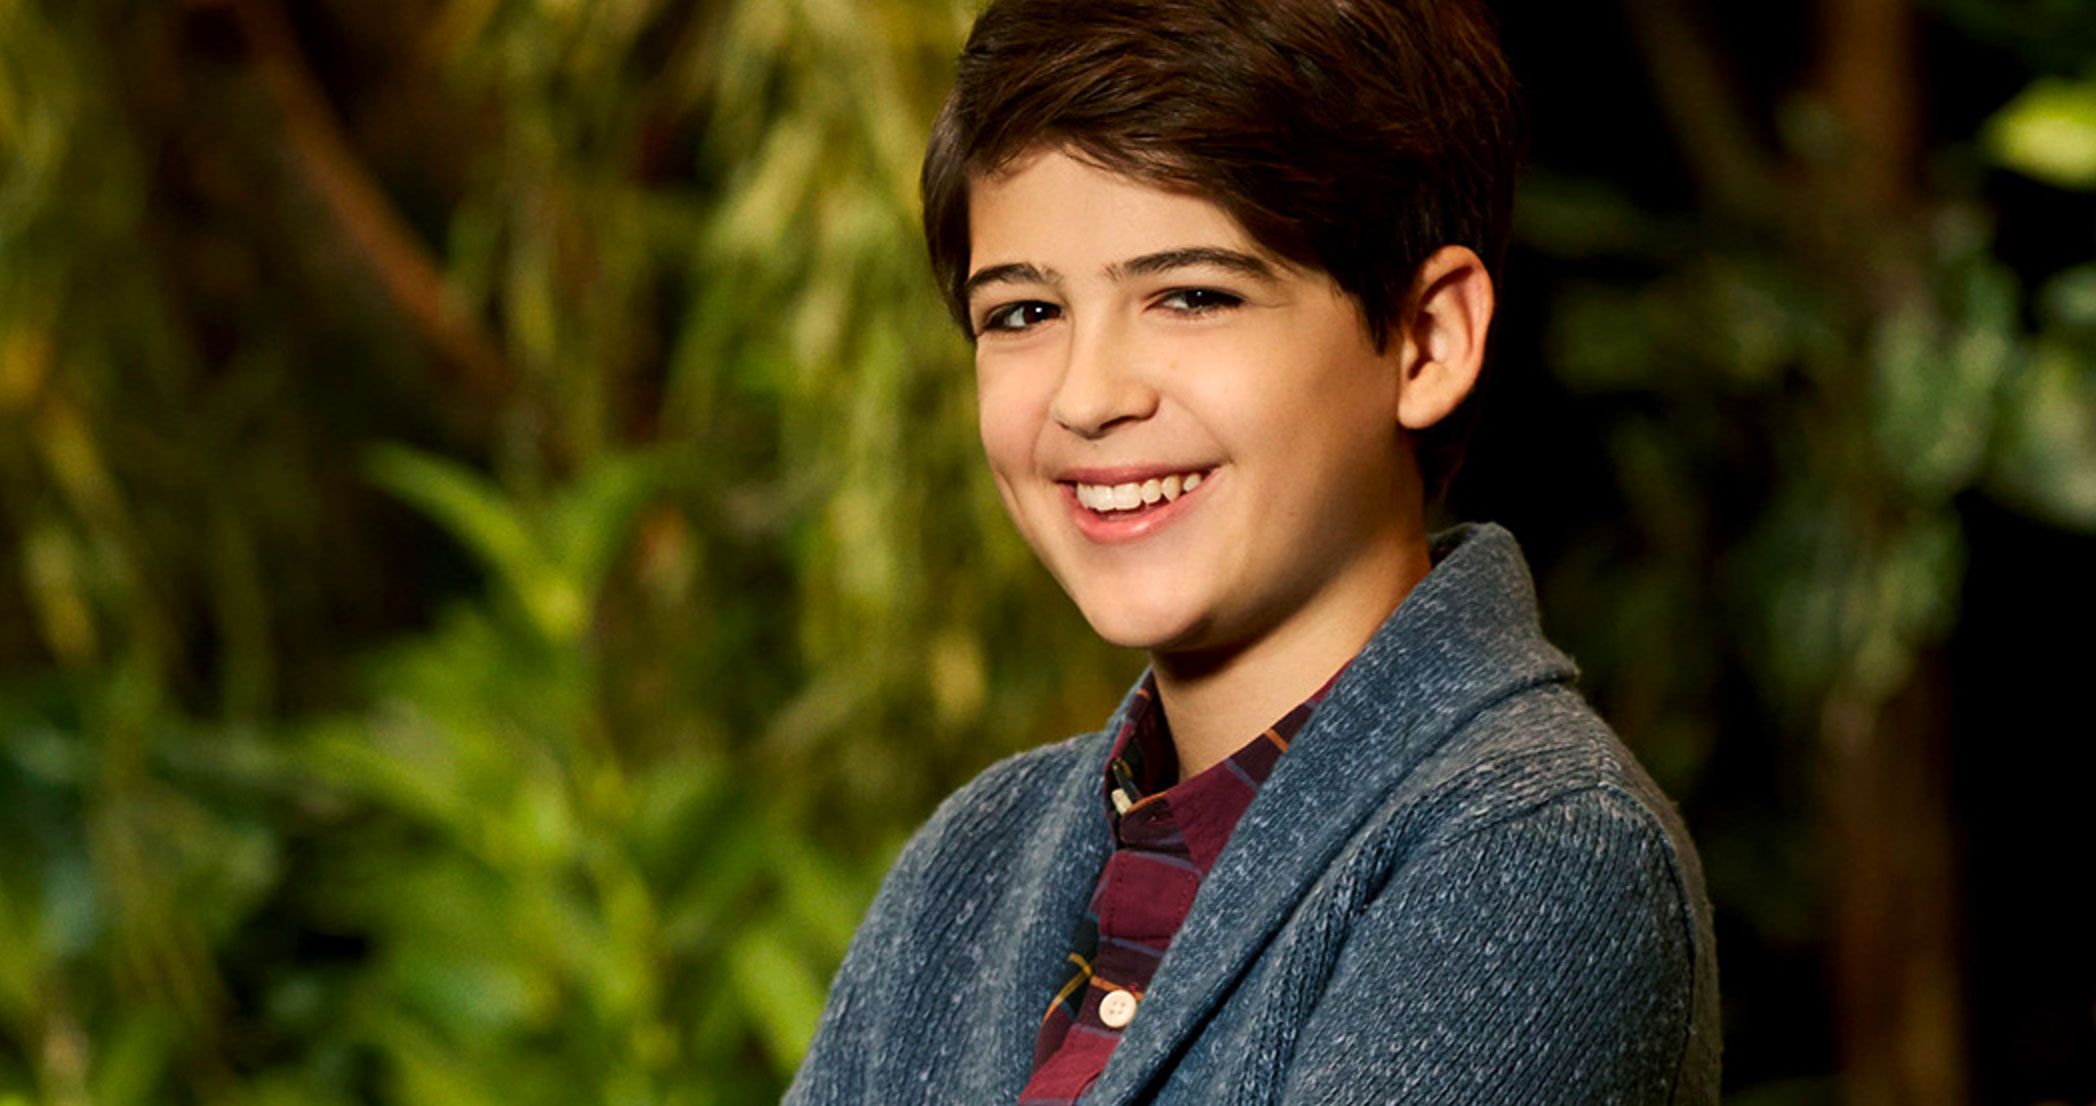 Disney Channel introduces first gay storyline into teen TV show, Andi Mack